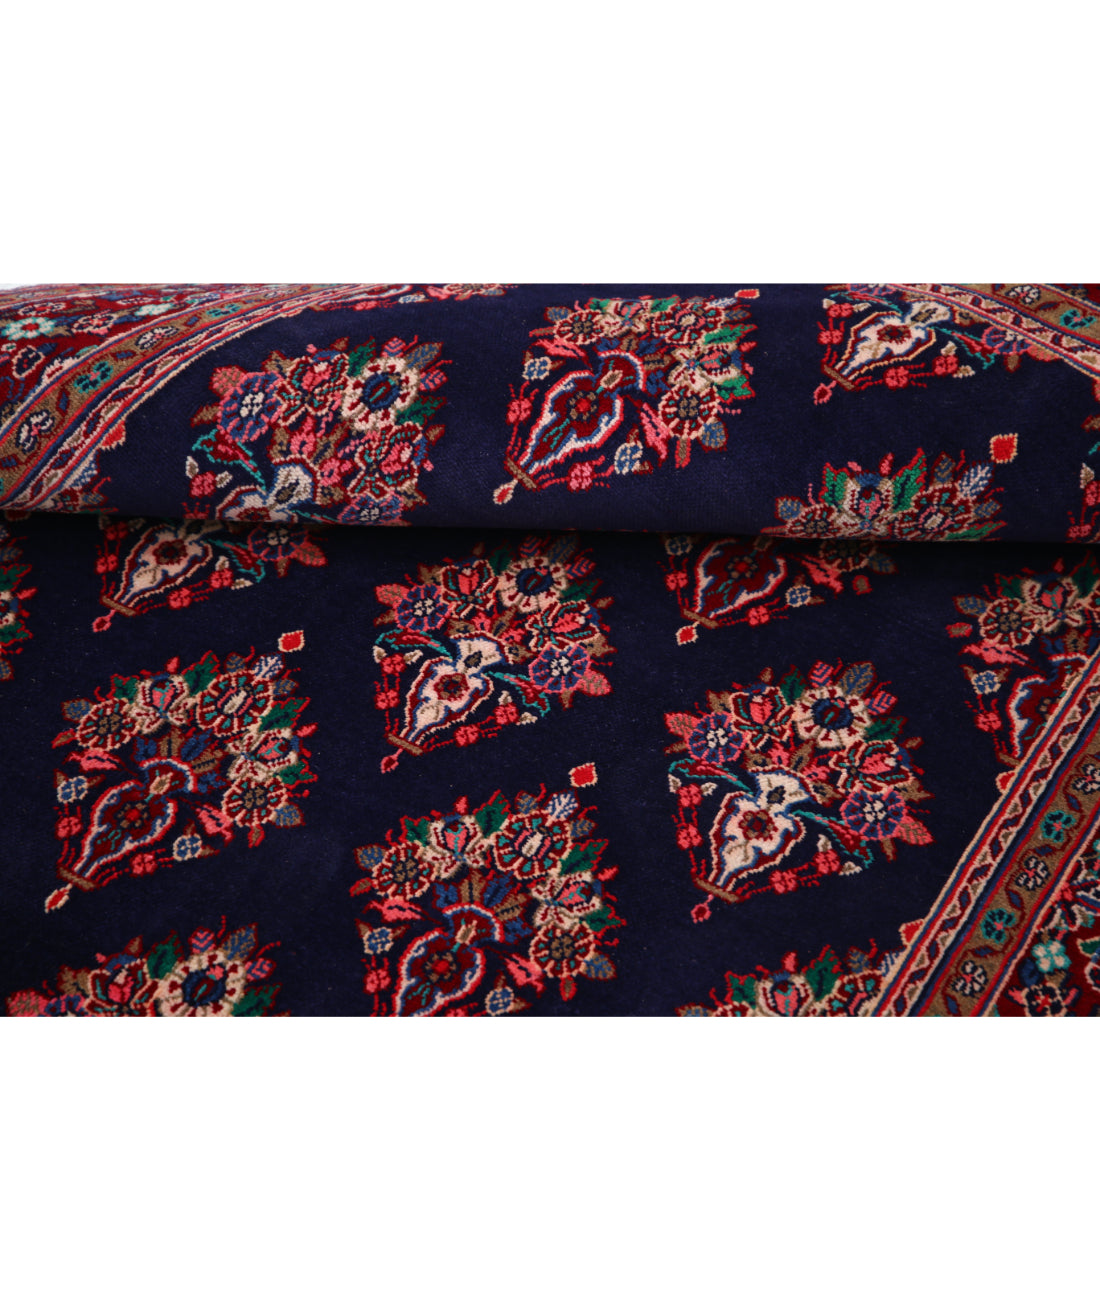 Hand Knotted Persian Kashan Wool Rug - 4'4'' x 6'9'' 4'4'' x 6'9'' (130 X 203) / Blue / Red